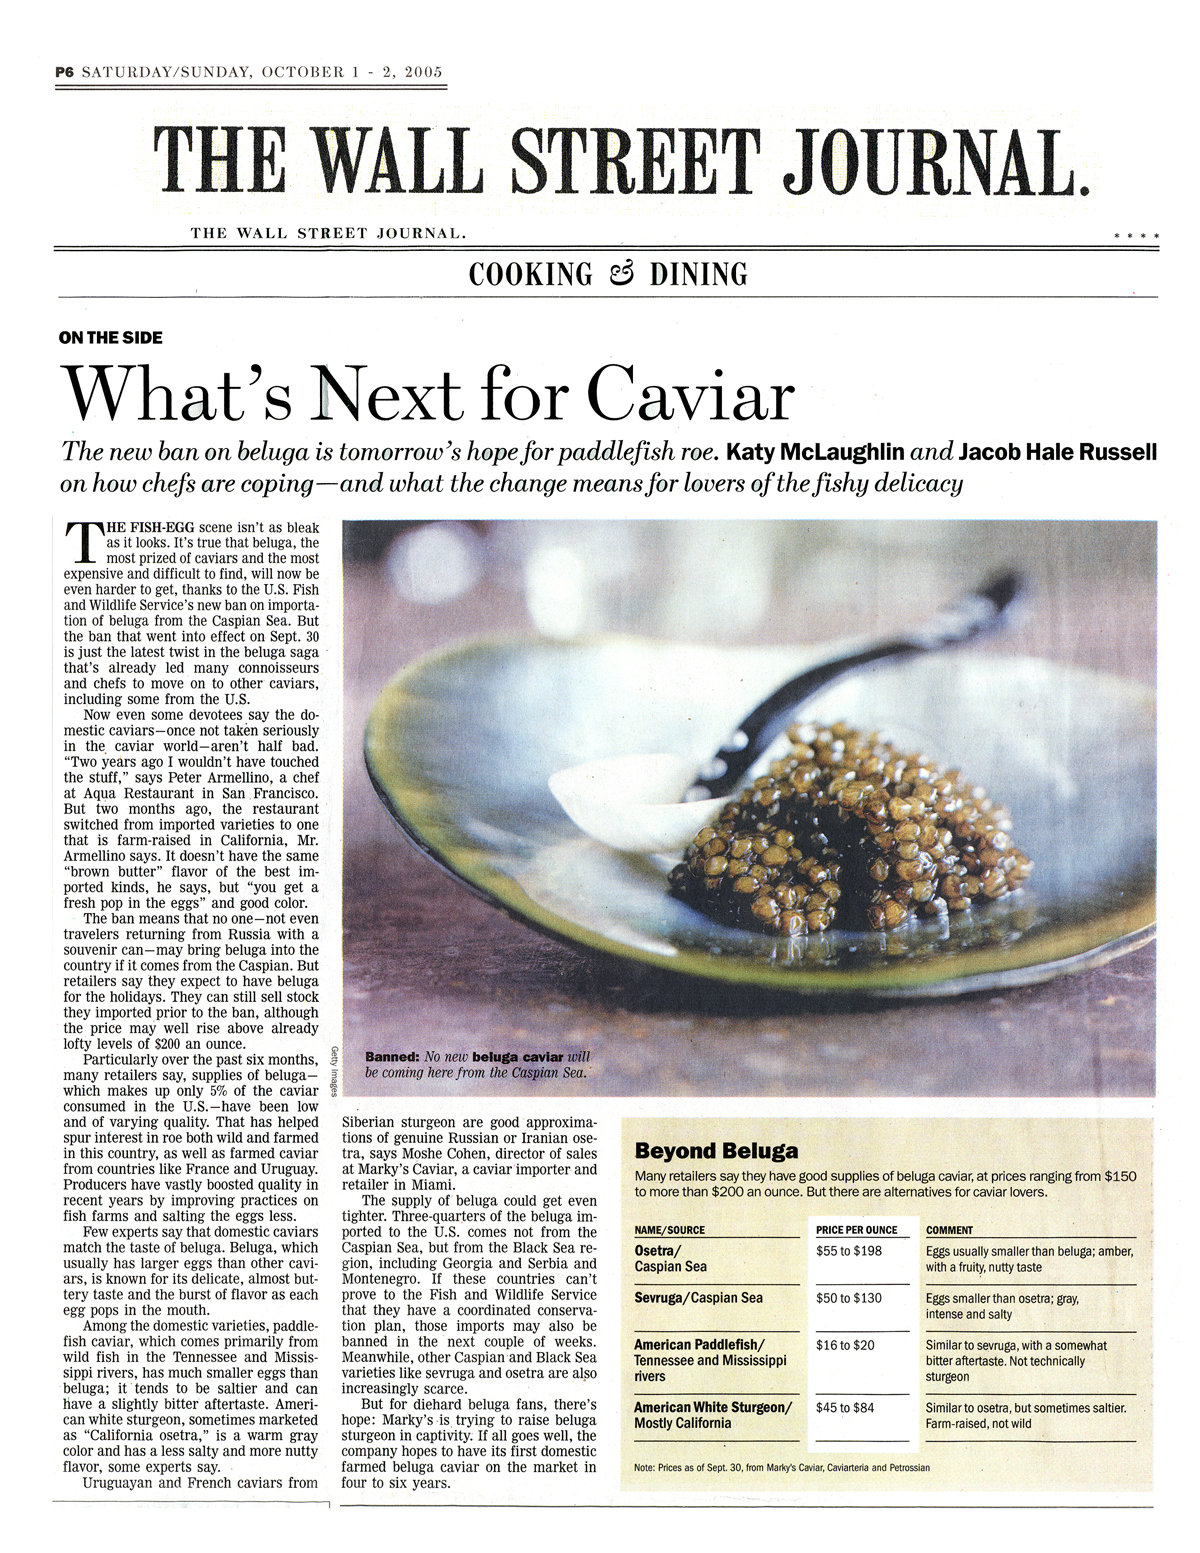 What's Next for Caviar